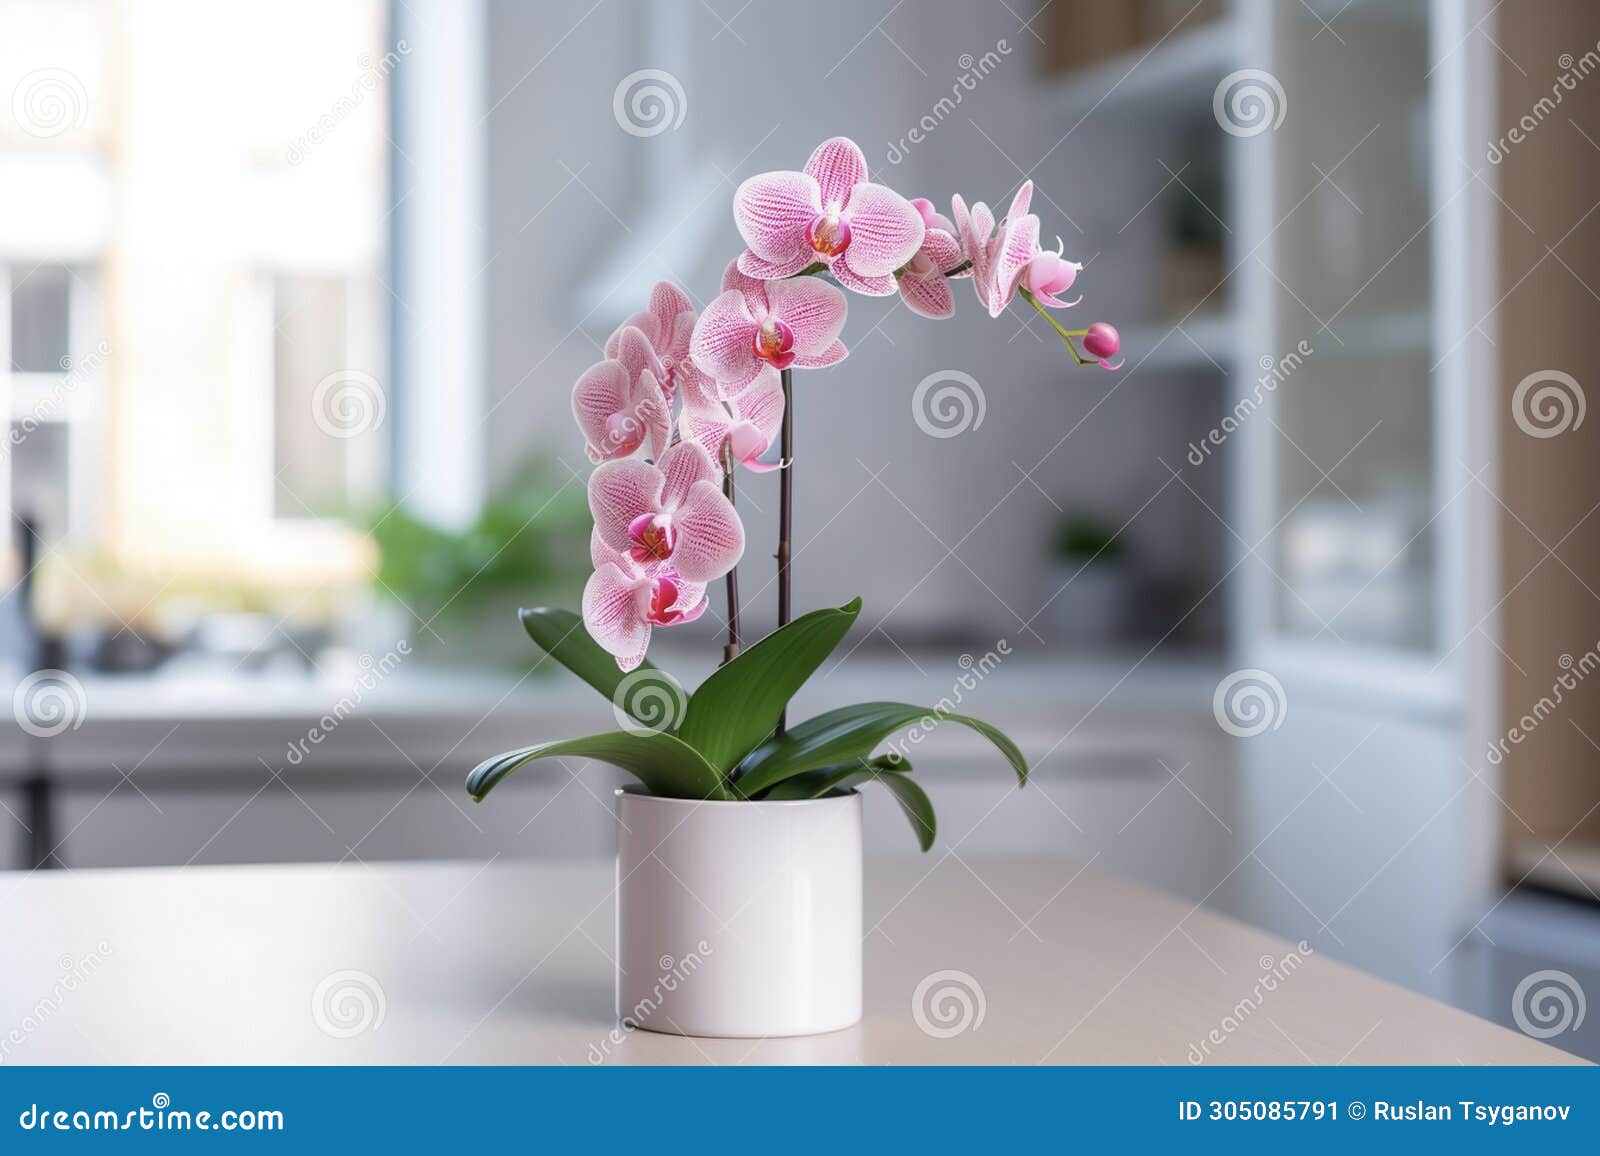 orchid, orchidaceae, flower with leaves in a pot